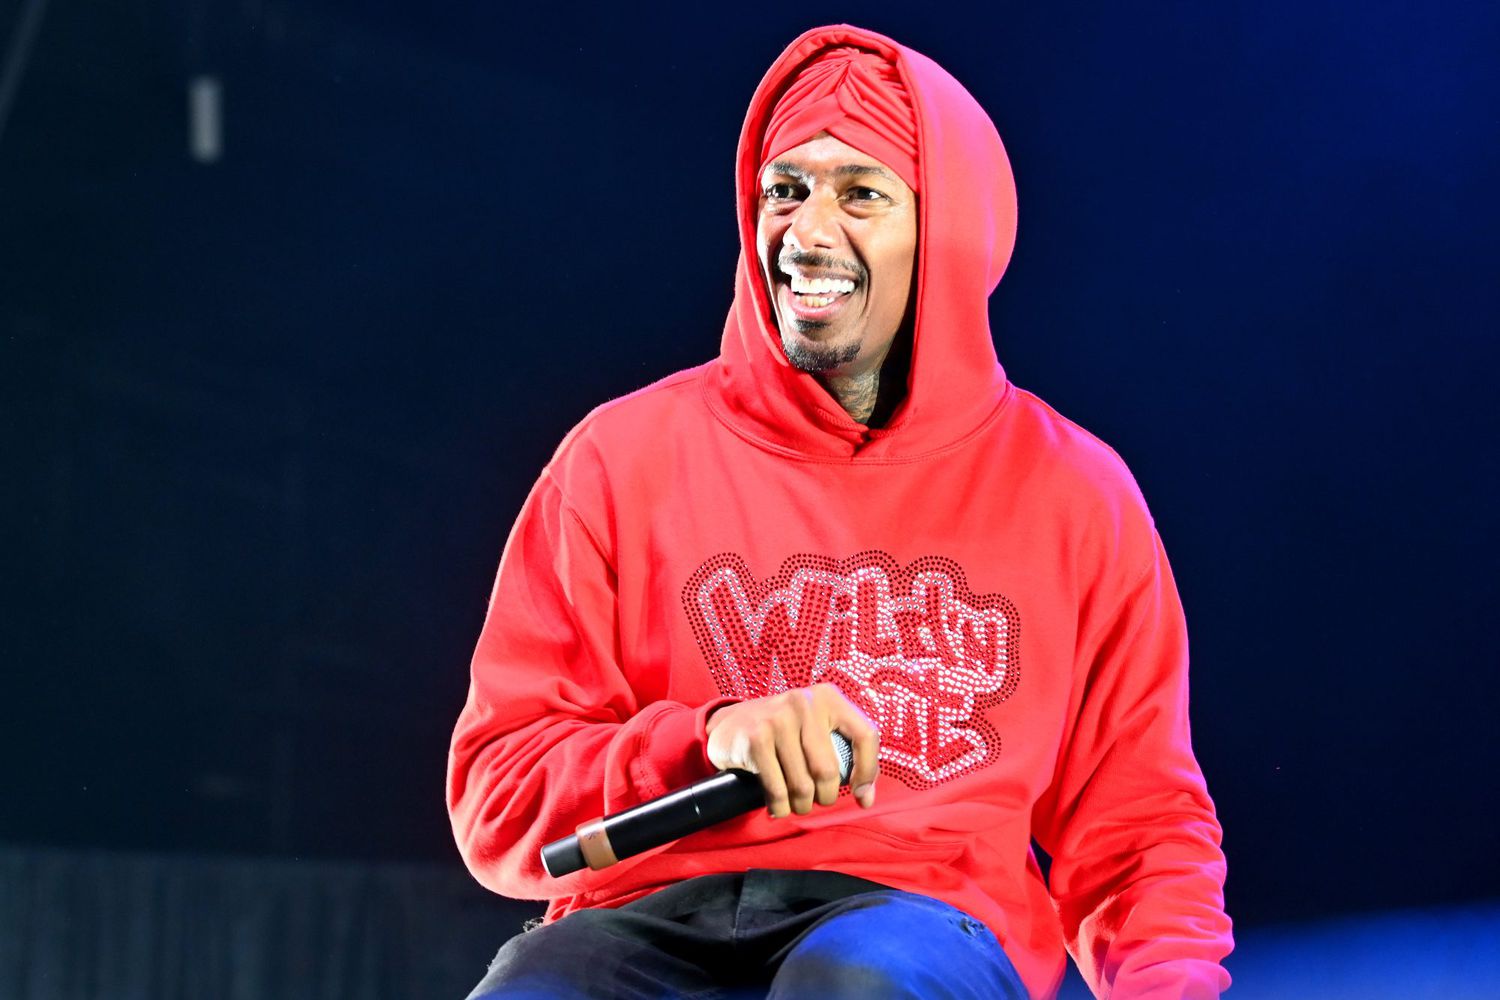 ATLANTA, GEORGIA - MAY 20: Nick Cannon performs onstage during opening night of Nick Cannon Presents: MTV Wild 'N Out Live at Cellairis Amphitheatre at Lakewood on May 20, 2022 in Atlanta, Georgia. (Photo by Paras Griffin/Getty Images)